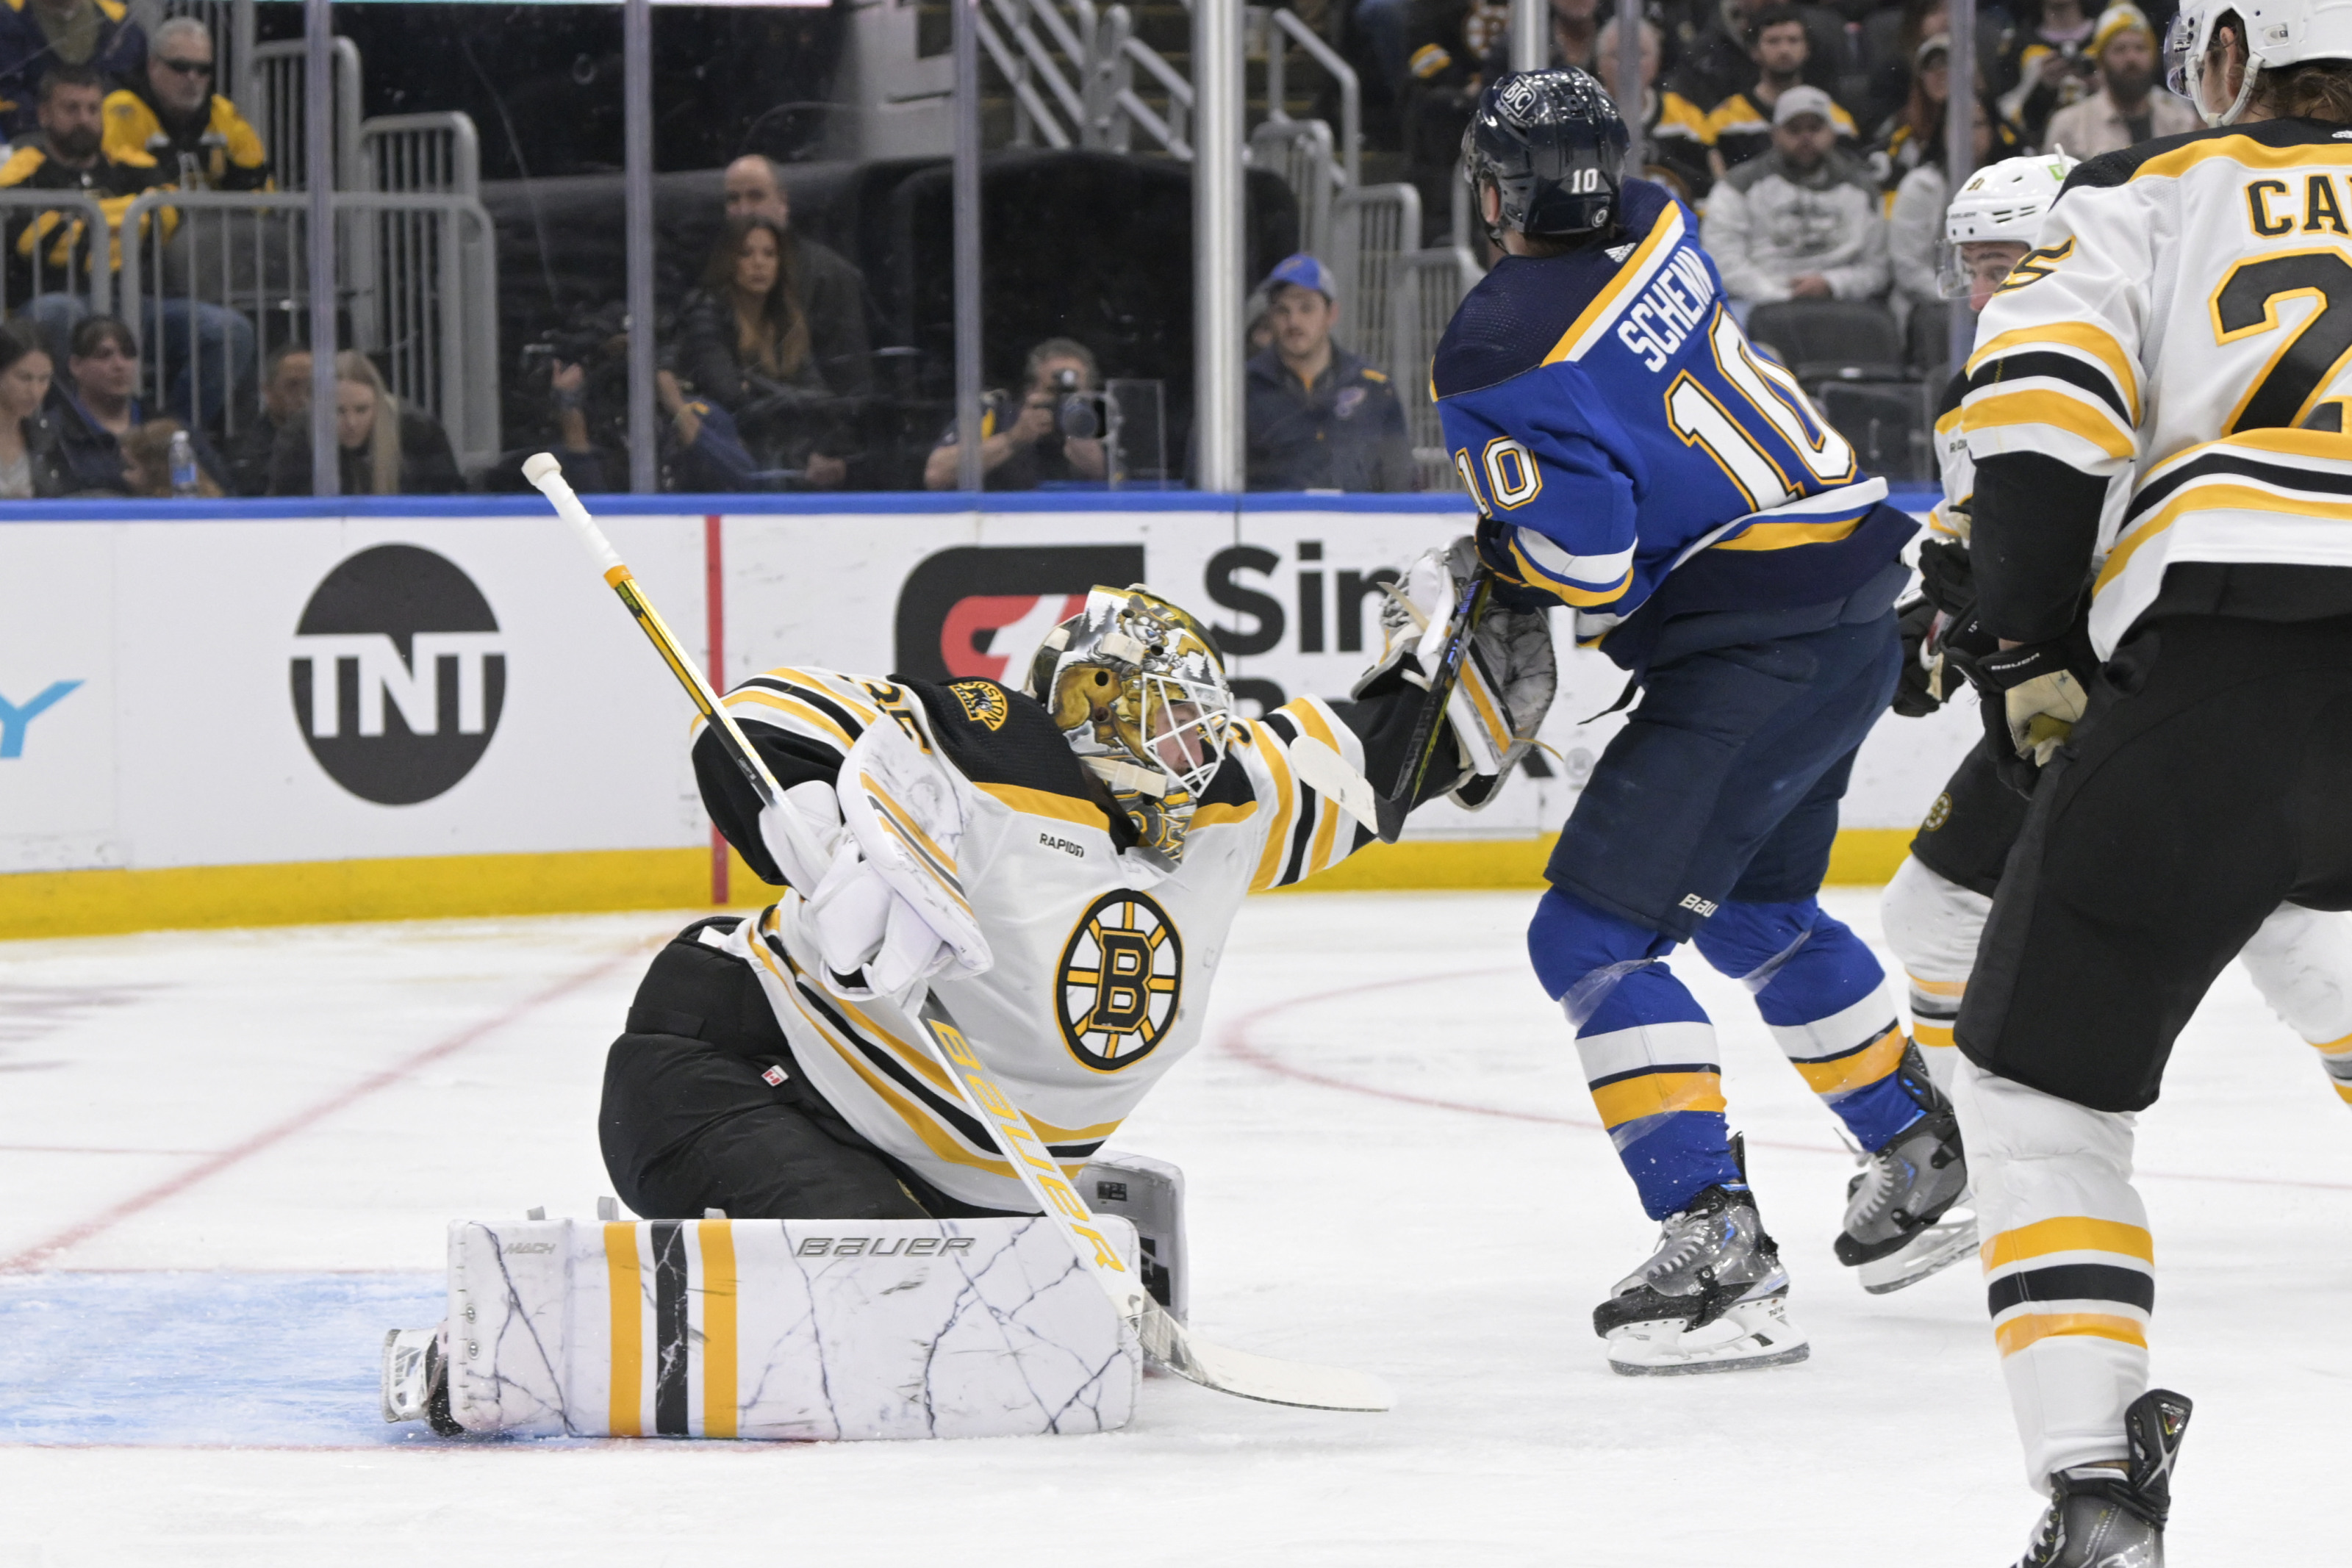 Boston Bruins: Why the St. Louis Blues game will be painful